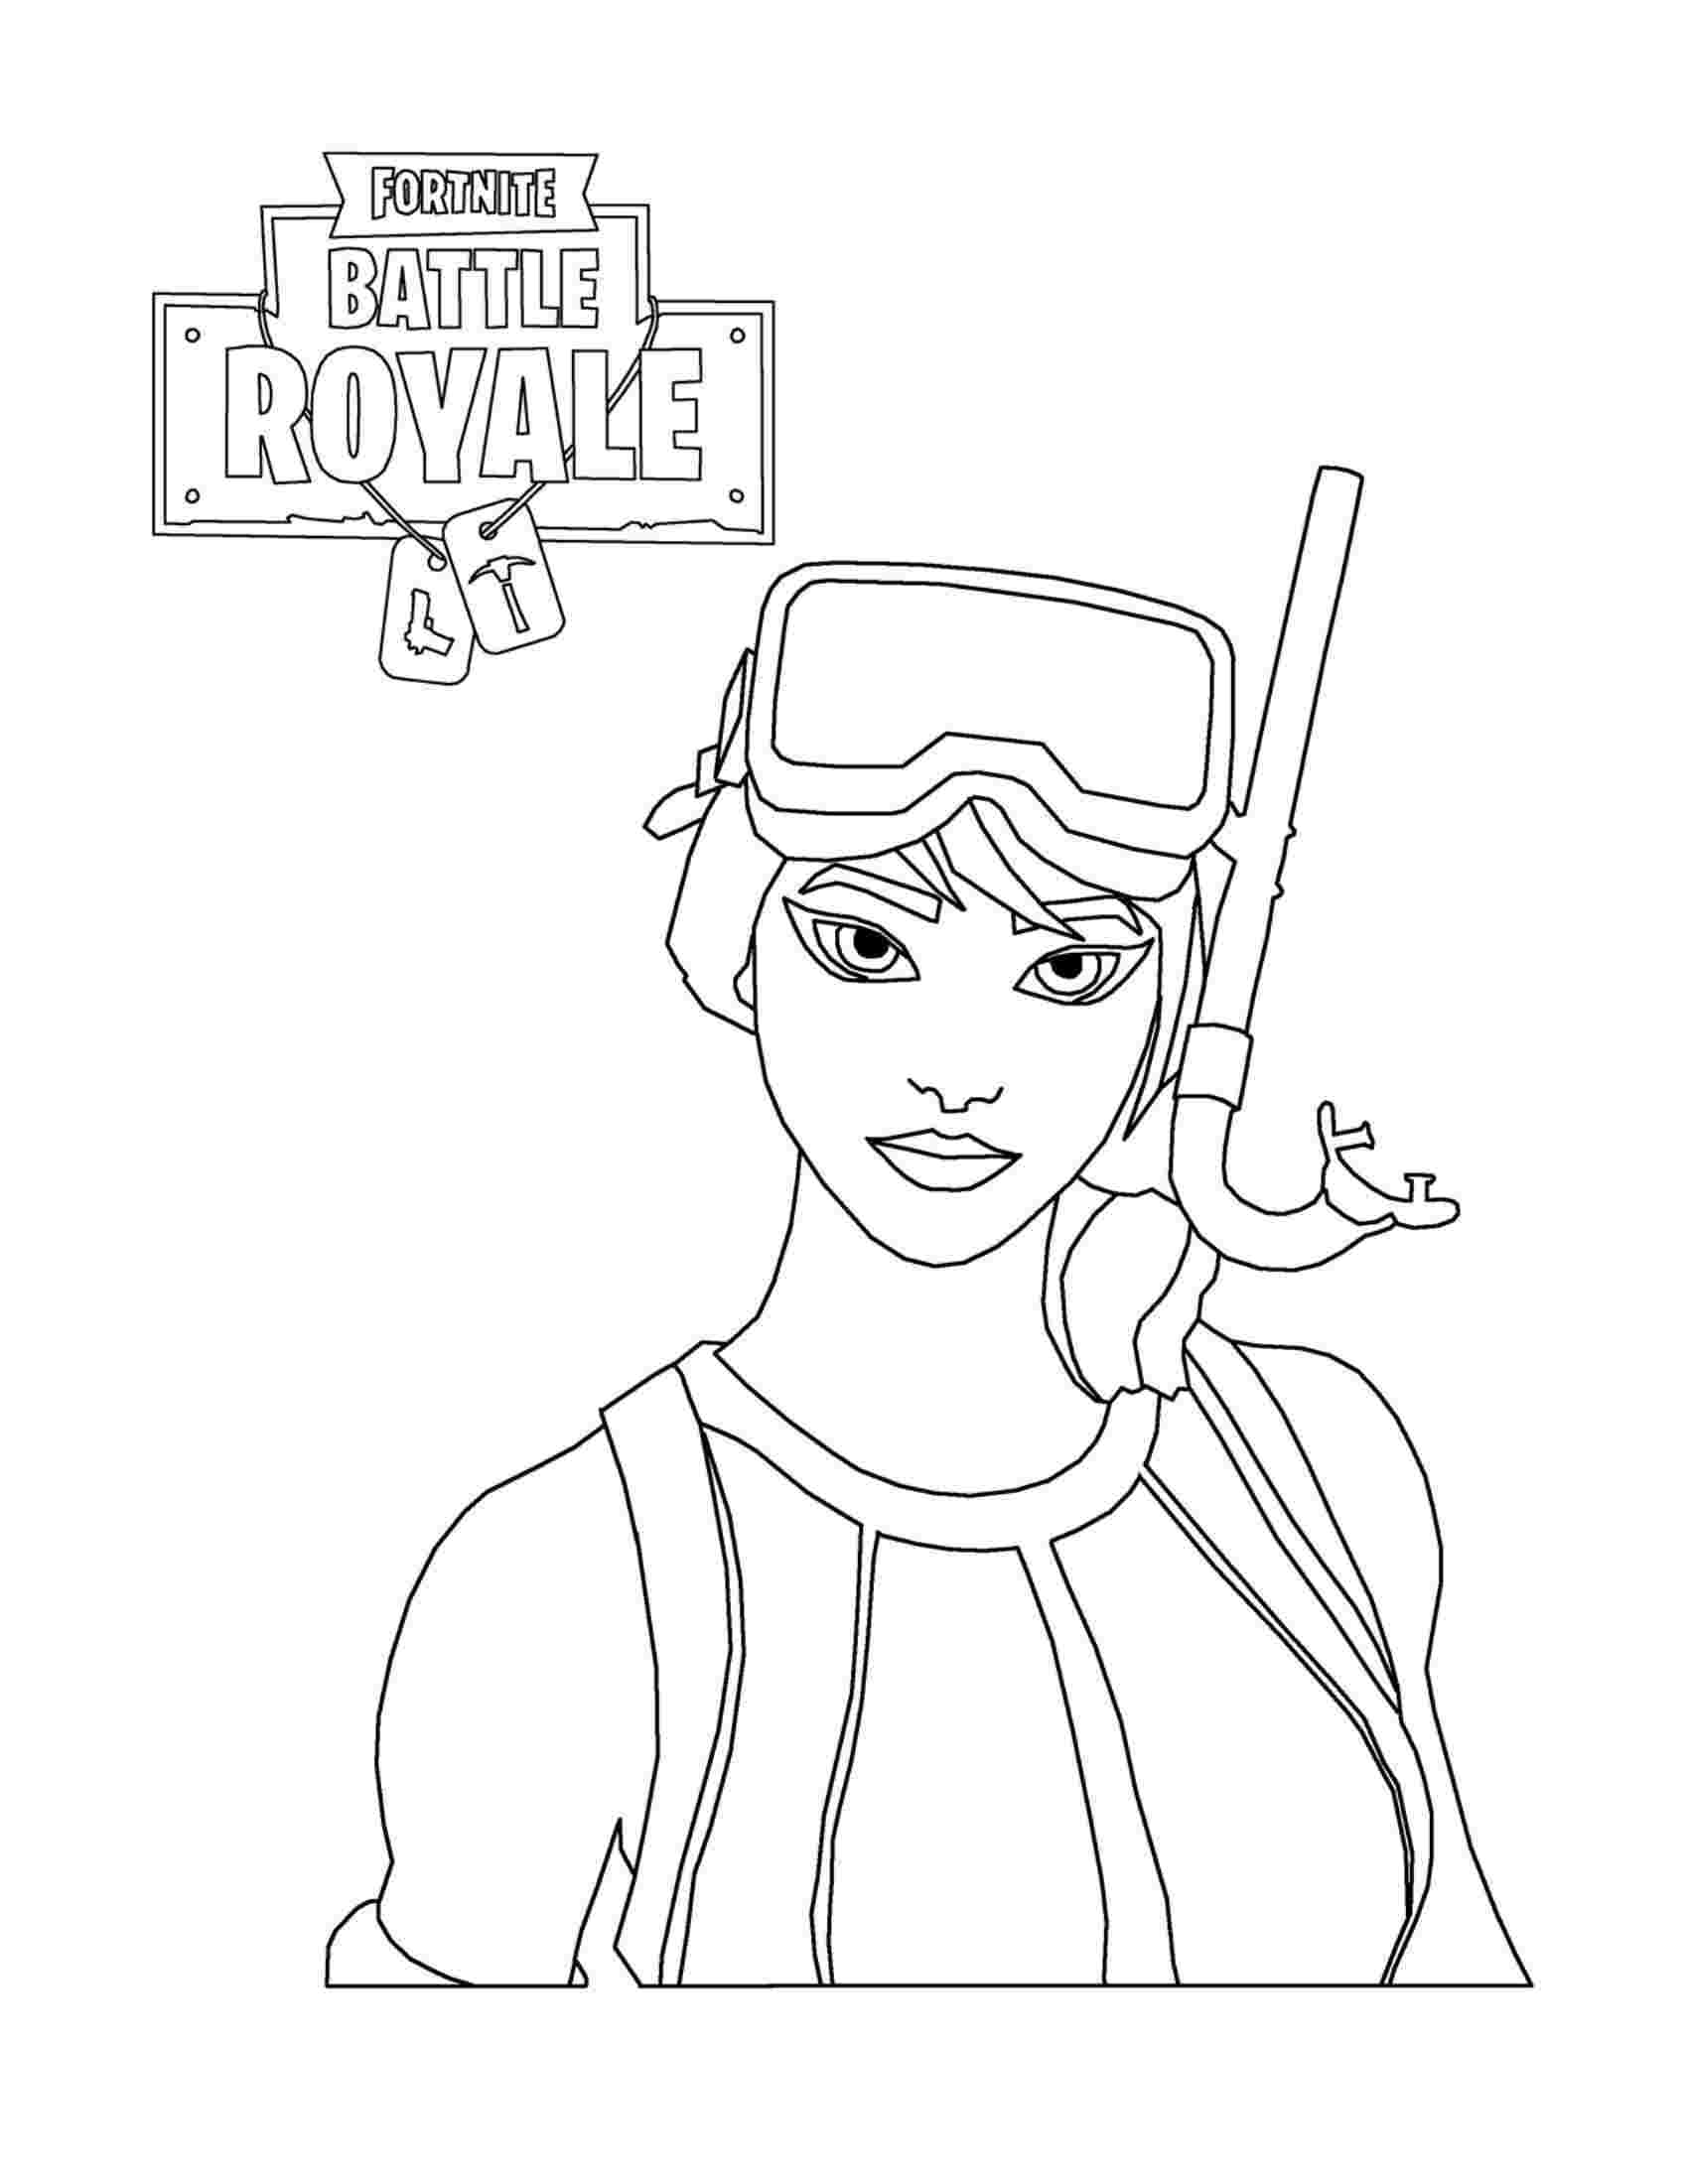 New fortnite coloring pages – Pcschool.info